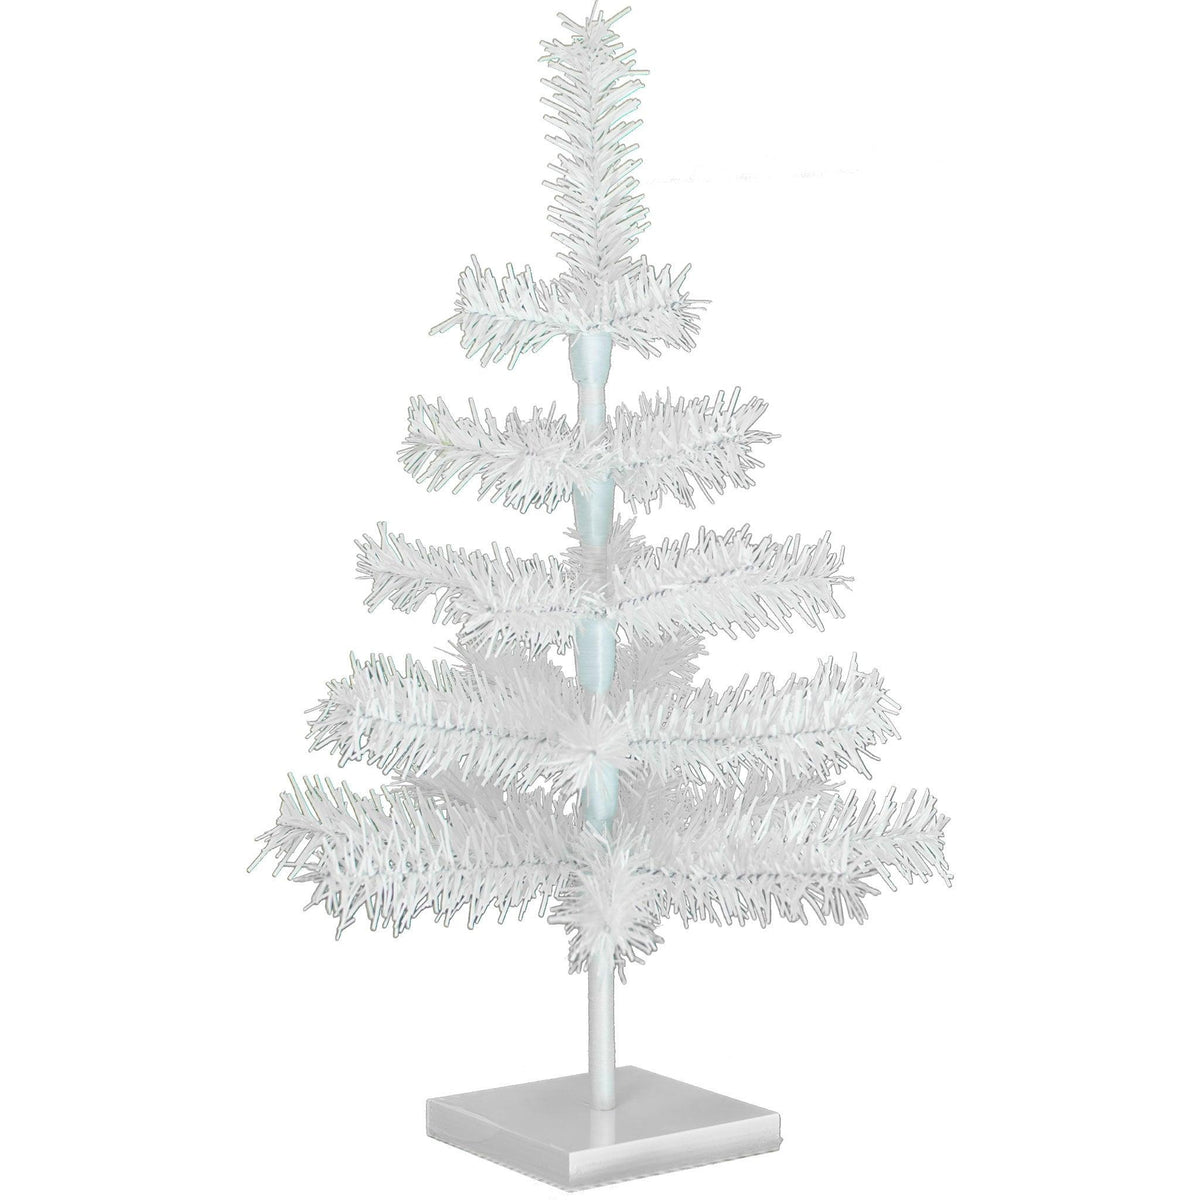 Lee Display's Original White Tinsel Christmas Trees!    Decorate for the holidays with a retro-style White Christmas Tree.  Incorporate a little white into your holiday decorations this year.    Brand New Brush:  18in Tinsel Trees now come with 1in thick brush on each branch.  Thinner branches make the smaller-sized trees look more elegant and cute!